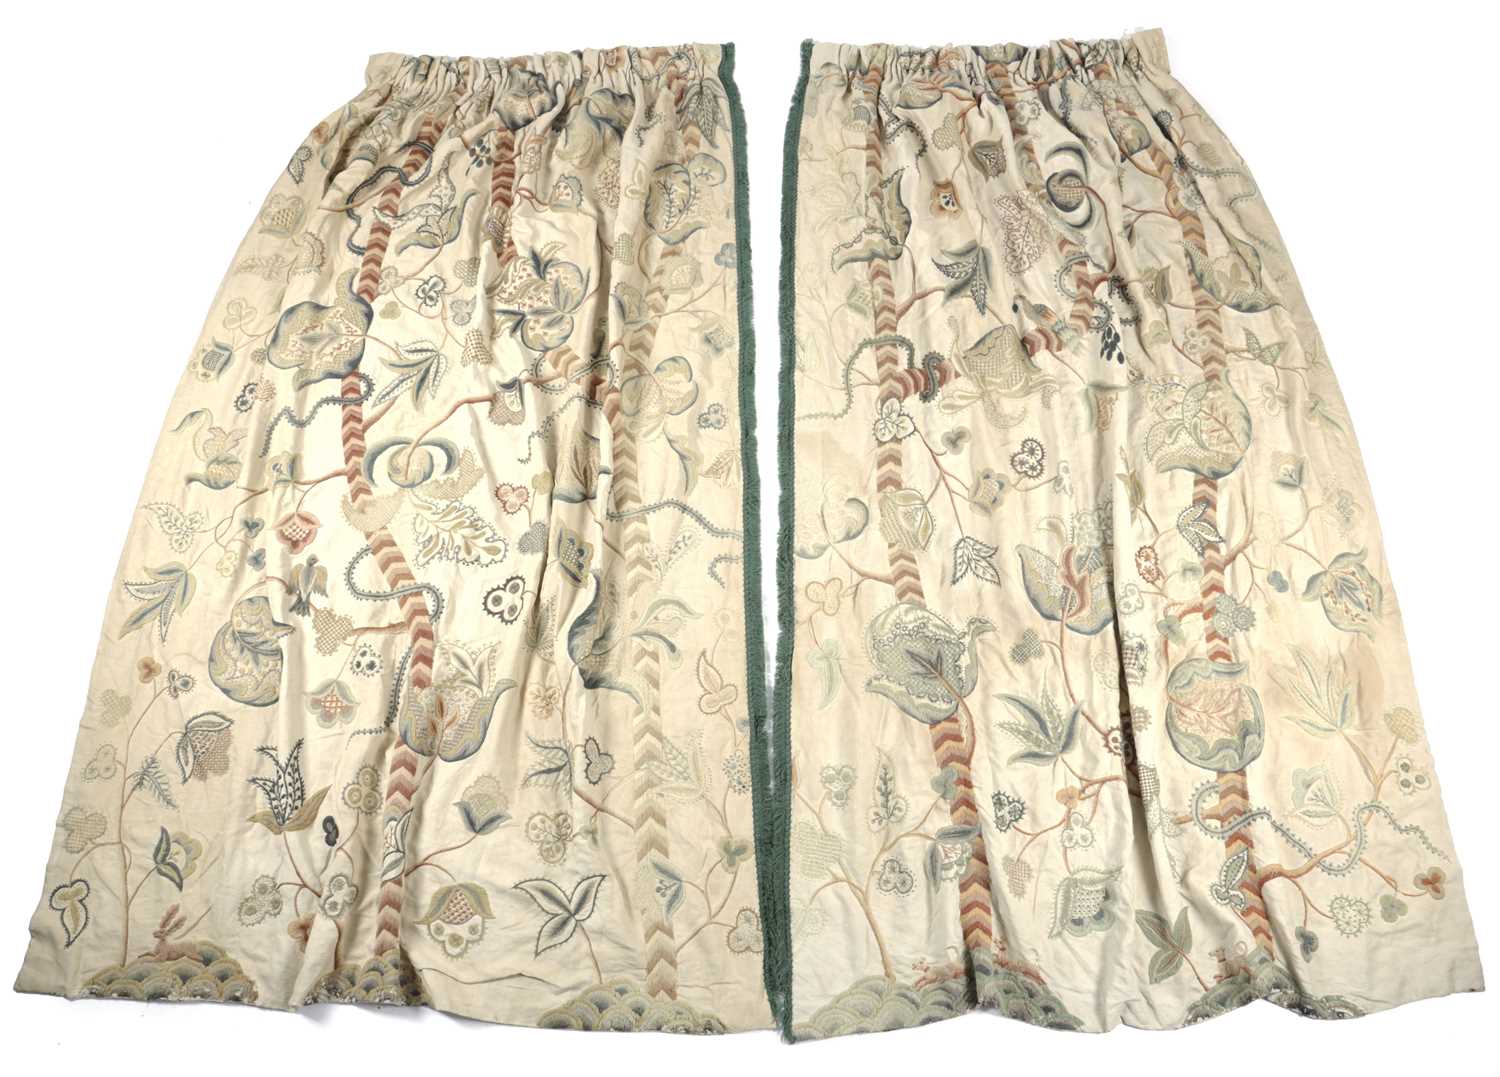 TWO PAIRS OF CREWEL WORK CURTAINS FIRST HALF 20TH CENTURY worked in wool with trees, birds, - Image 2 of 5